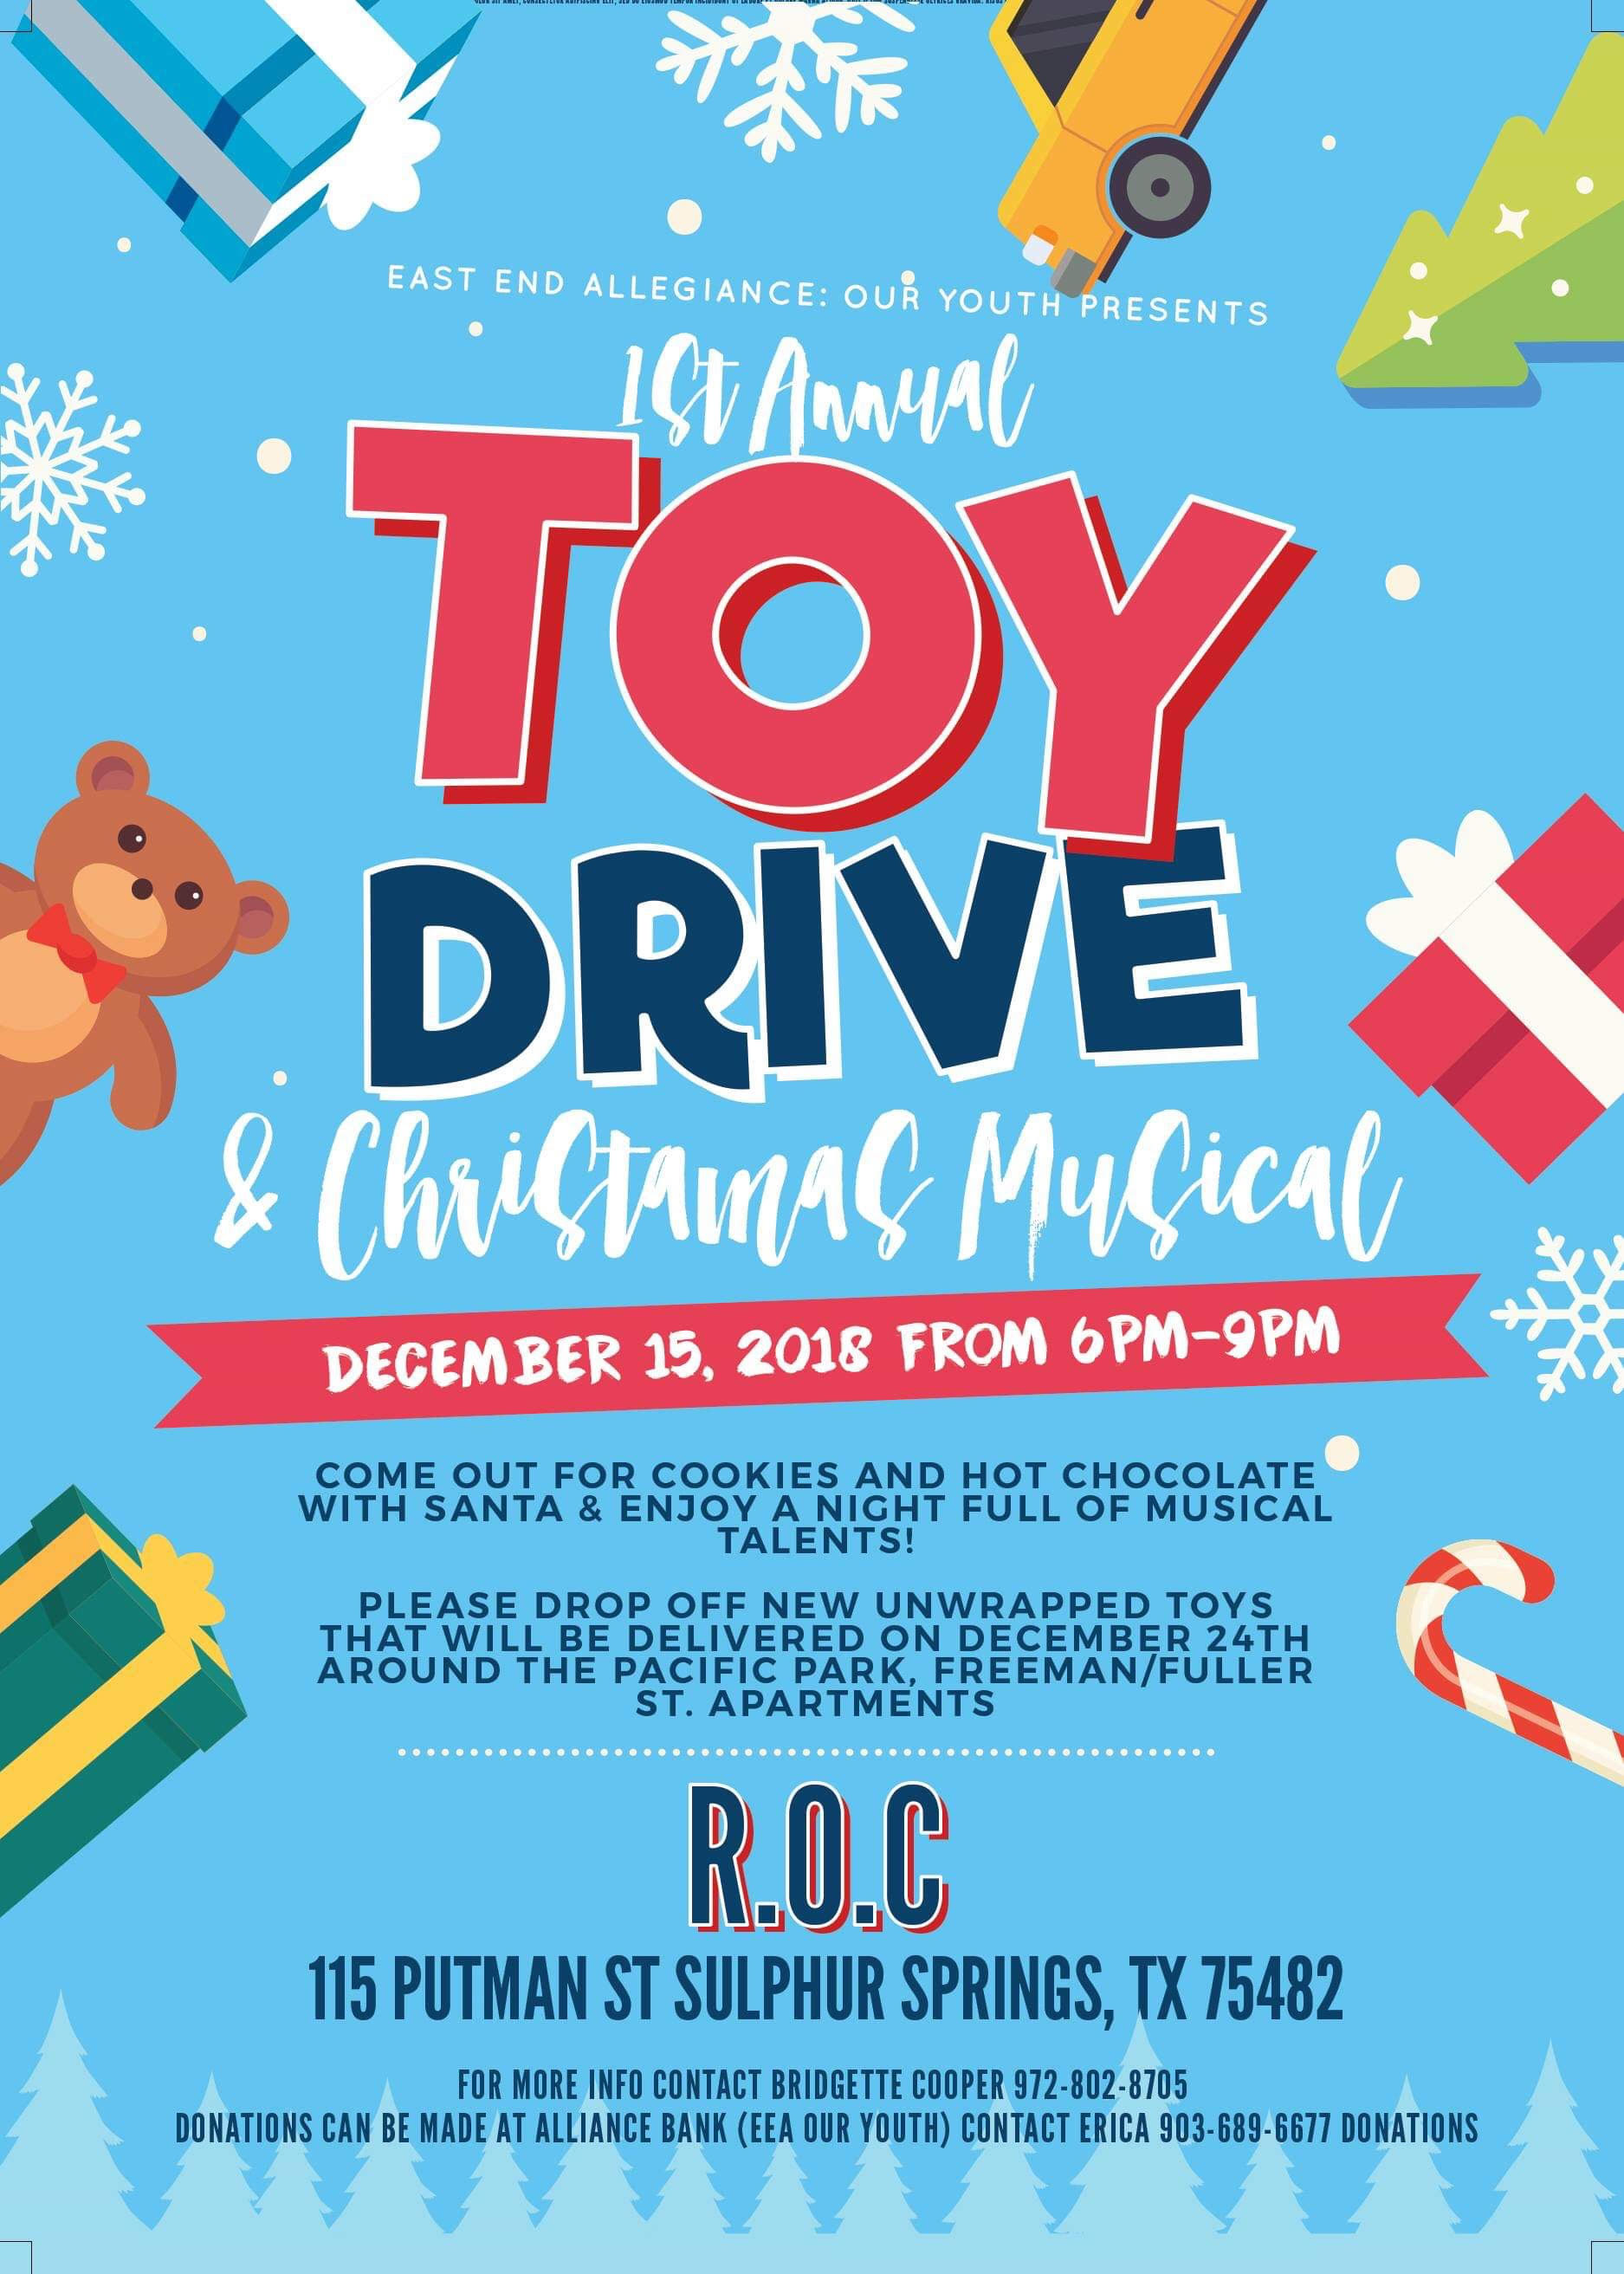 EEA OUR YOUTH Hosting 1st Annual Toy Drive & Christmas Musical on December 15th at The ROC